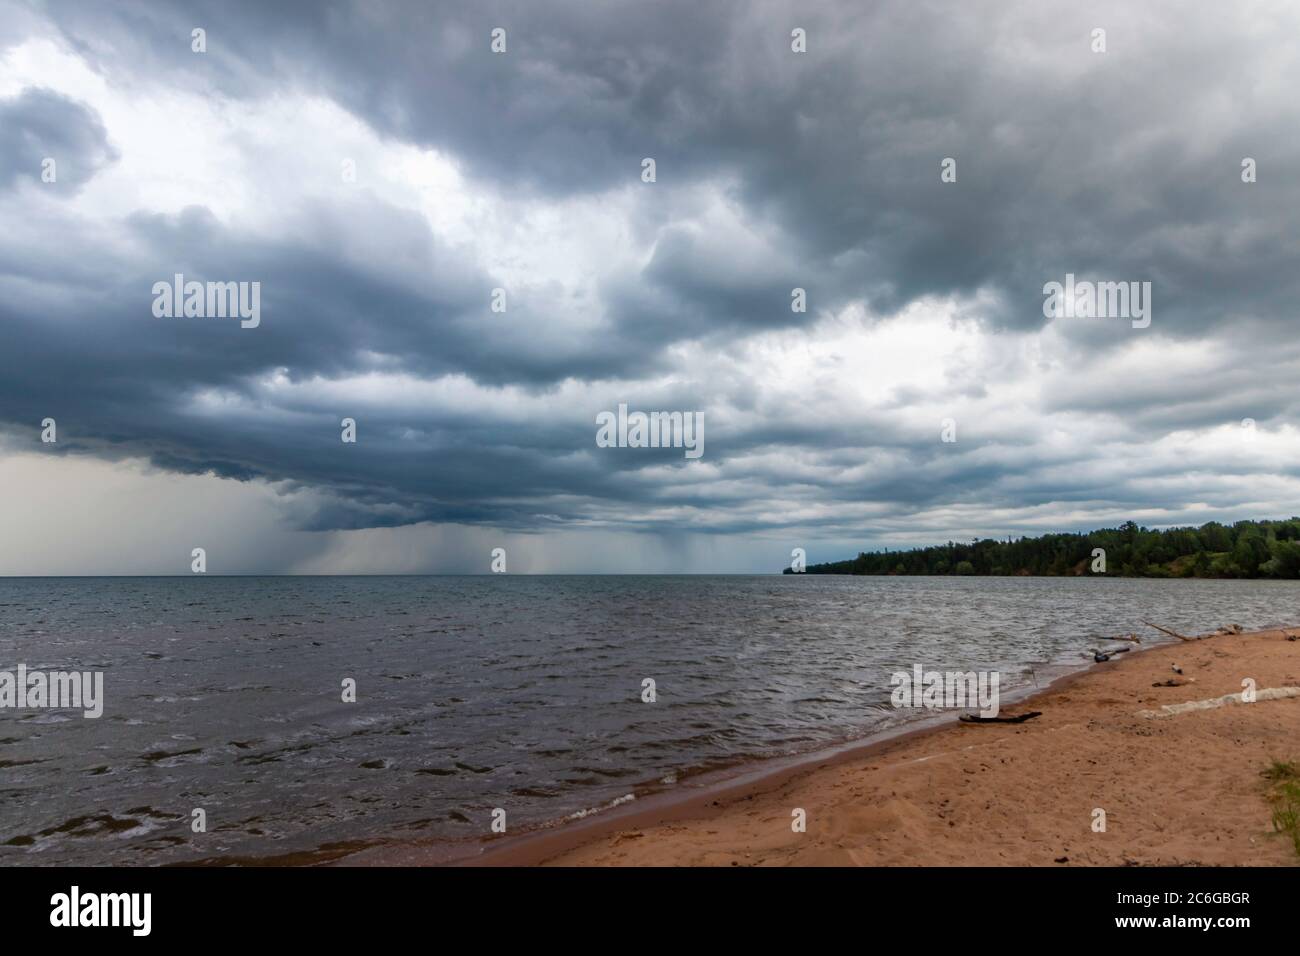 Supercell Thunderstorm Over Lake Superior Stock Photo